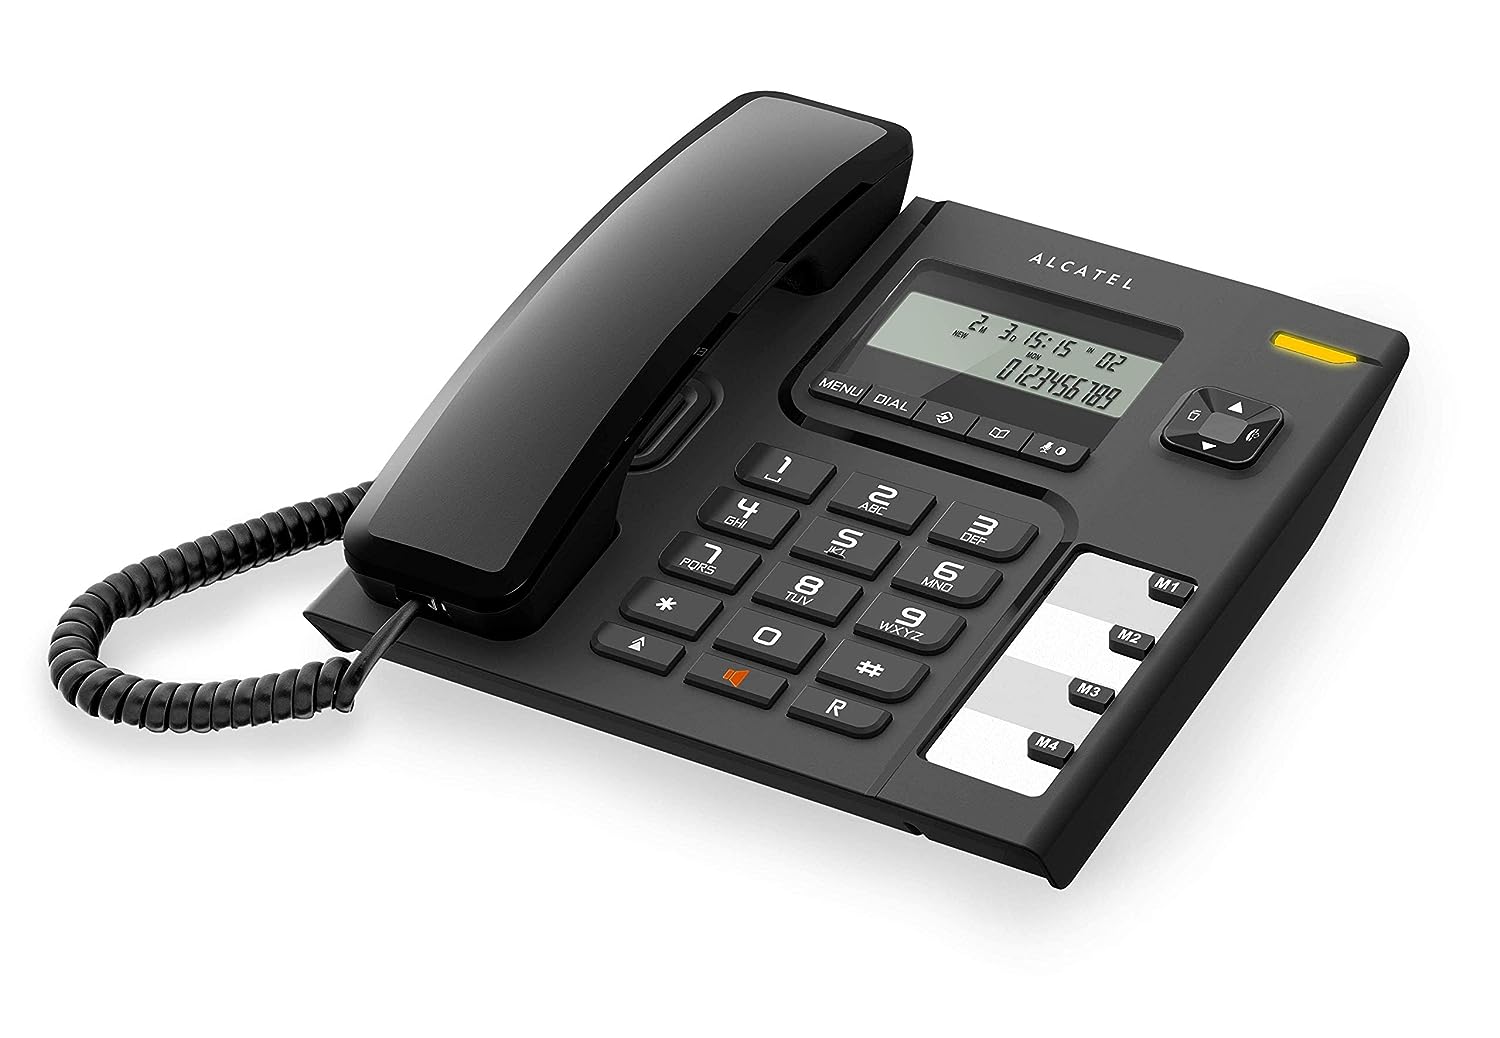 Alcatel T56 Corded Landline Phone With Caller Id And Handsfree (Black